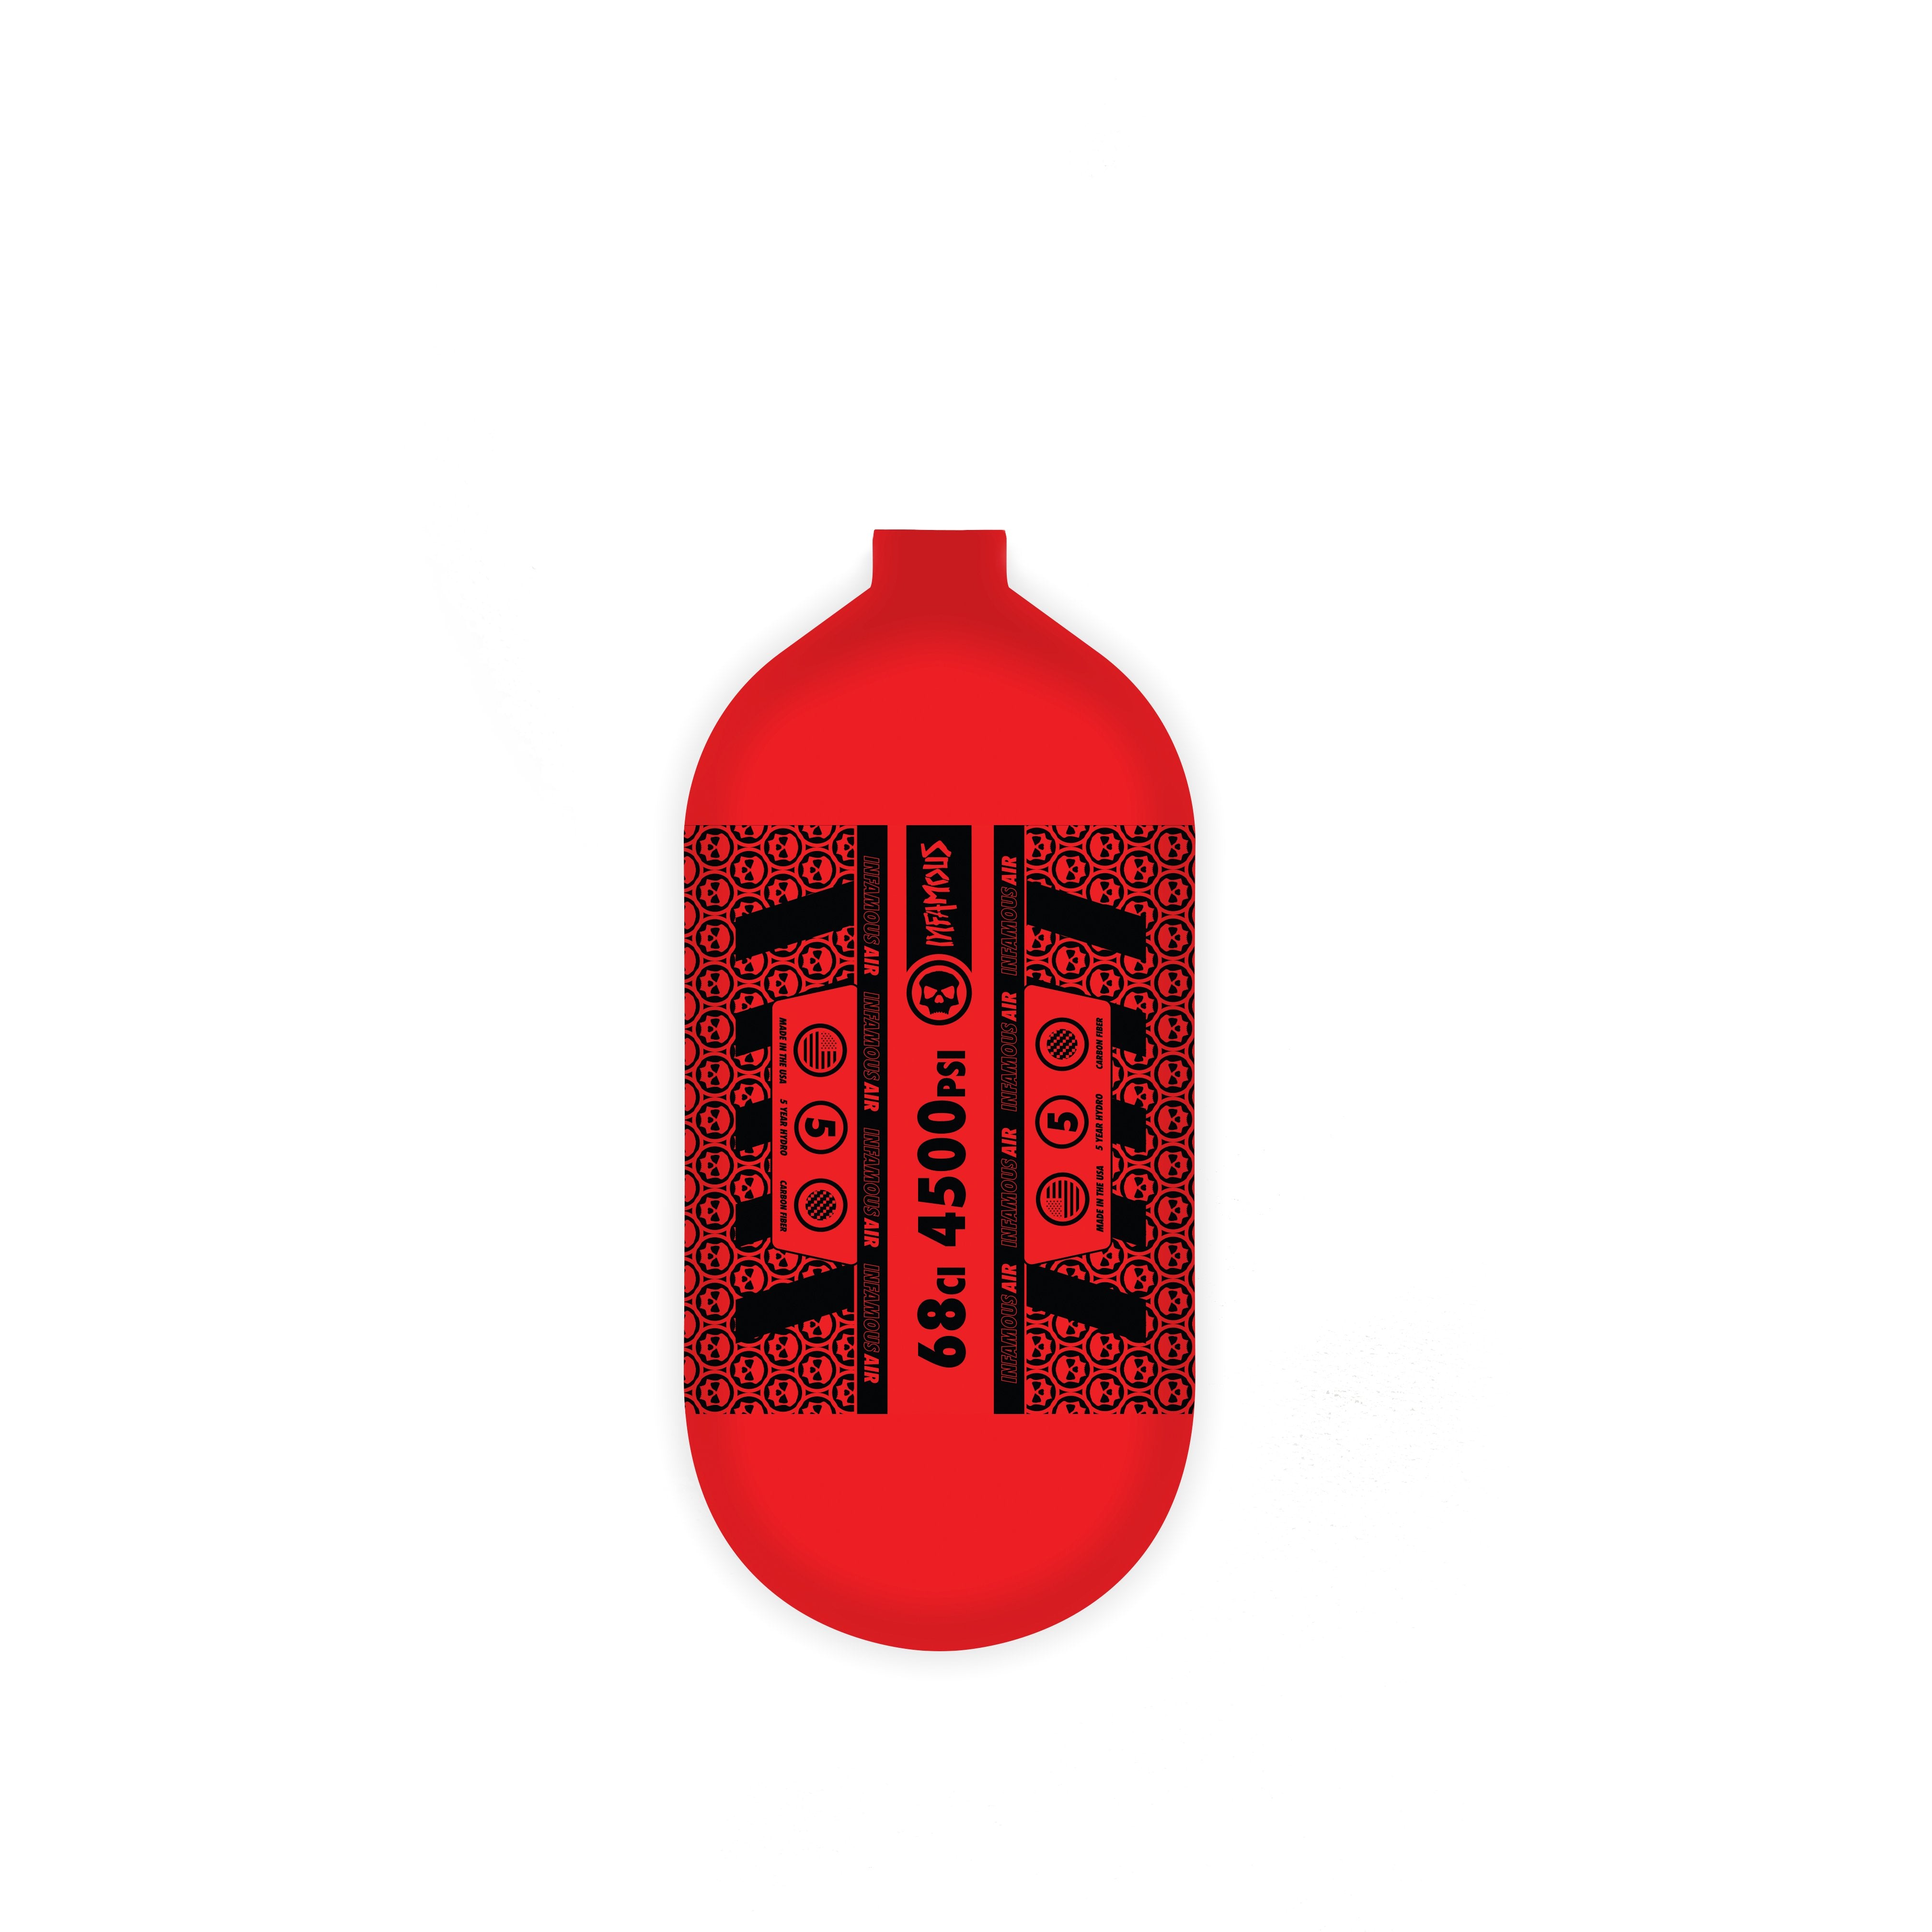 INFAMOUS AIR "SKULL SQUAD" Paintball Tank - BOTTLE ONLY - Red/Black - 68CI / 4500PSI